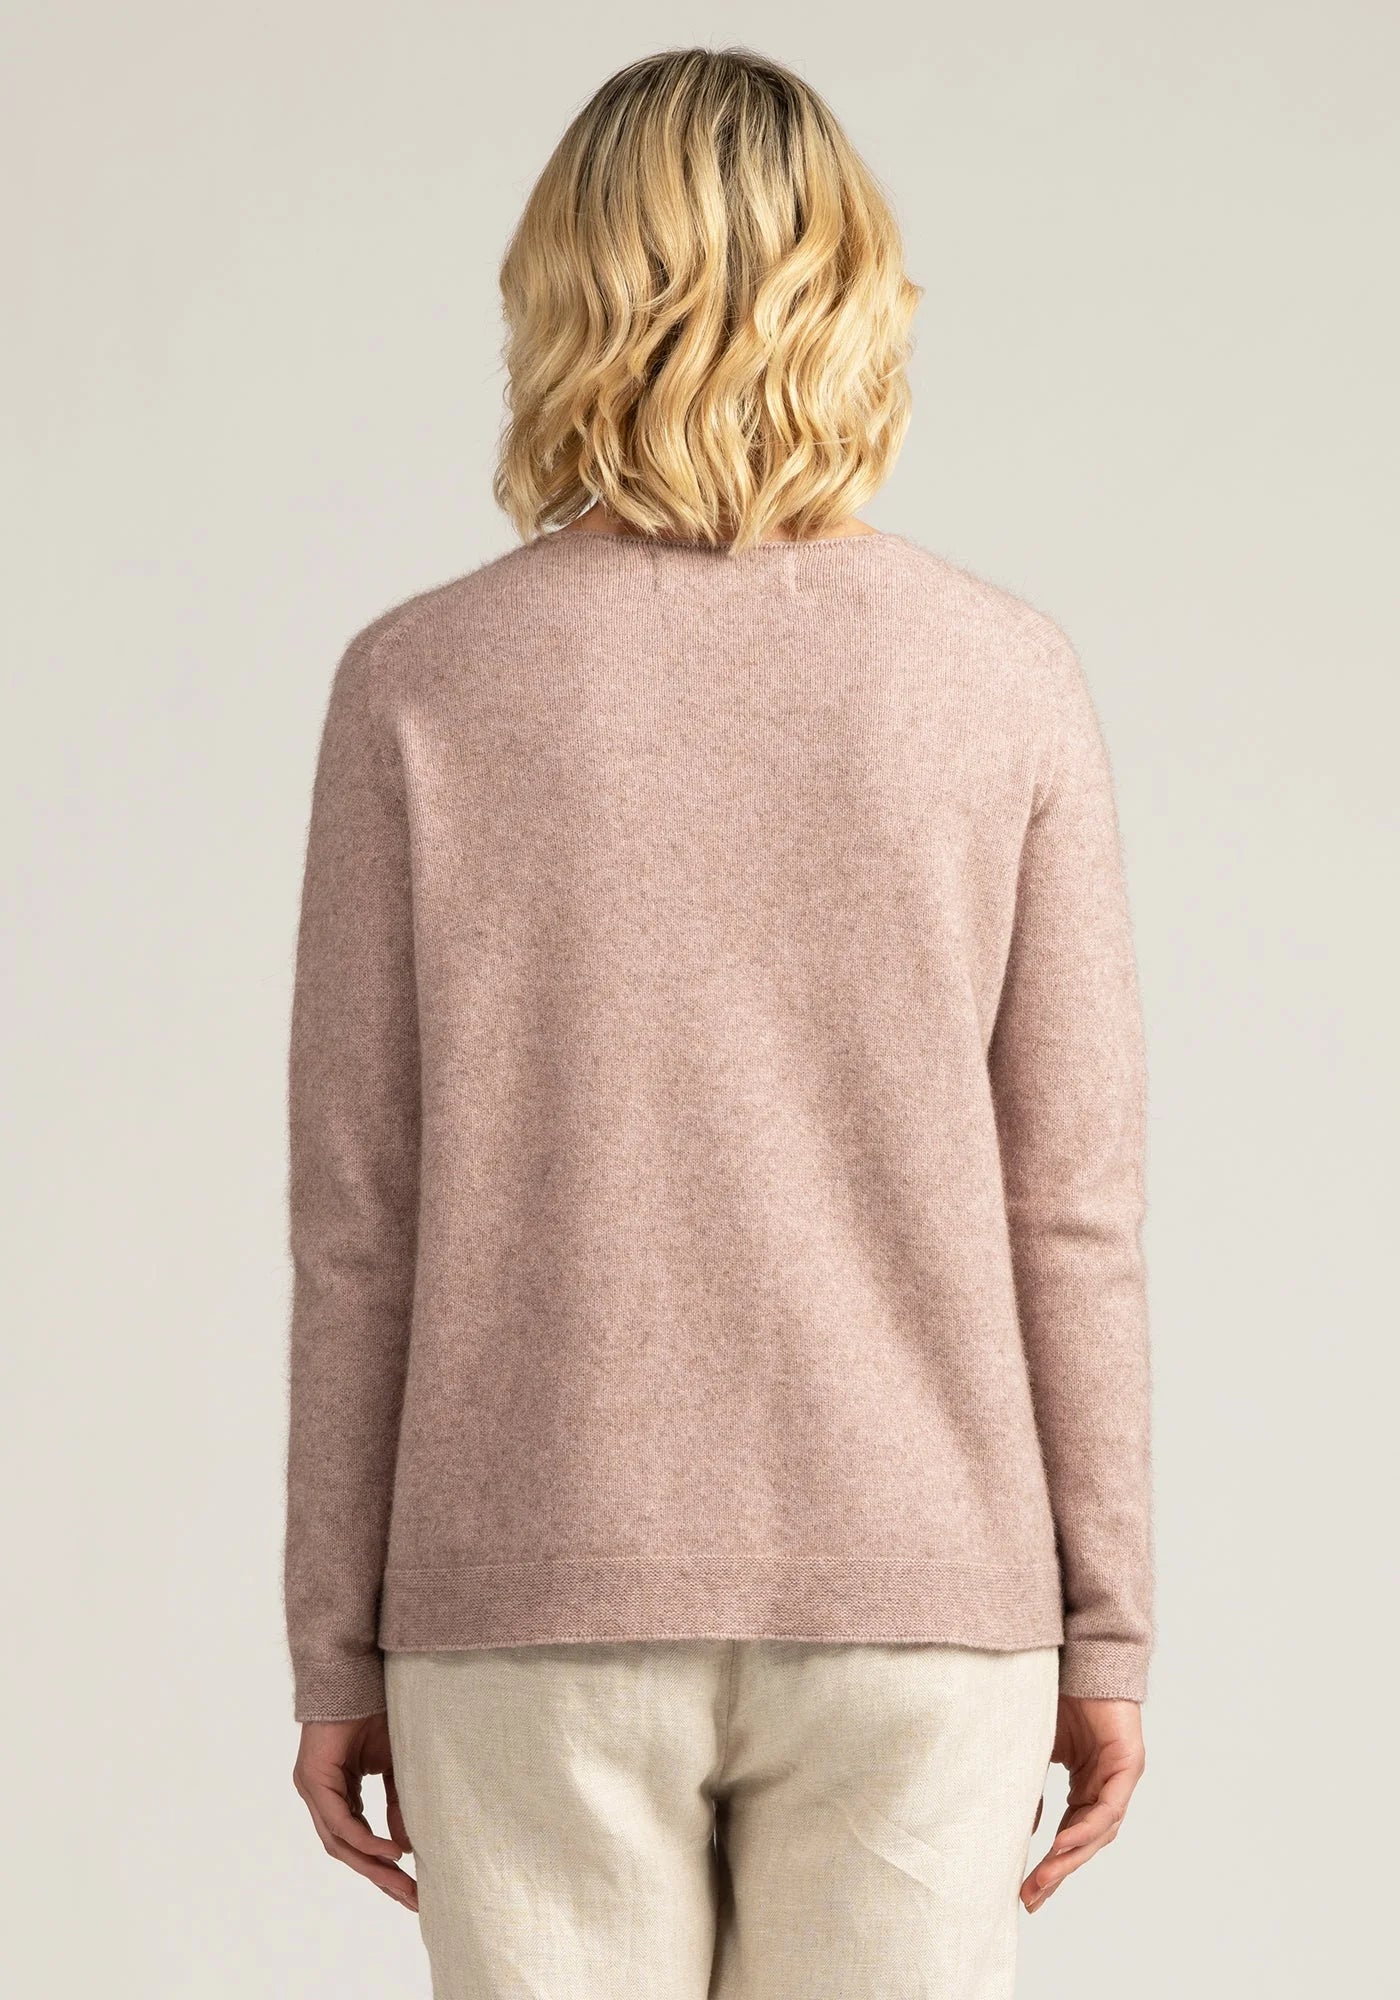 "Indulge in warmth and sophistication with our blush pink merino wool sweater. Shop the look today!"